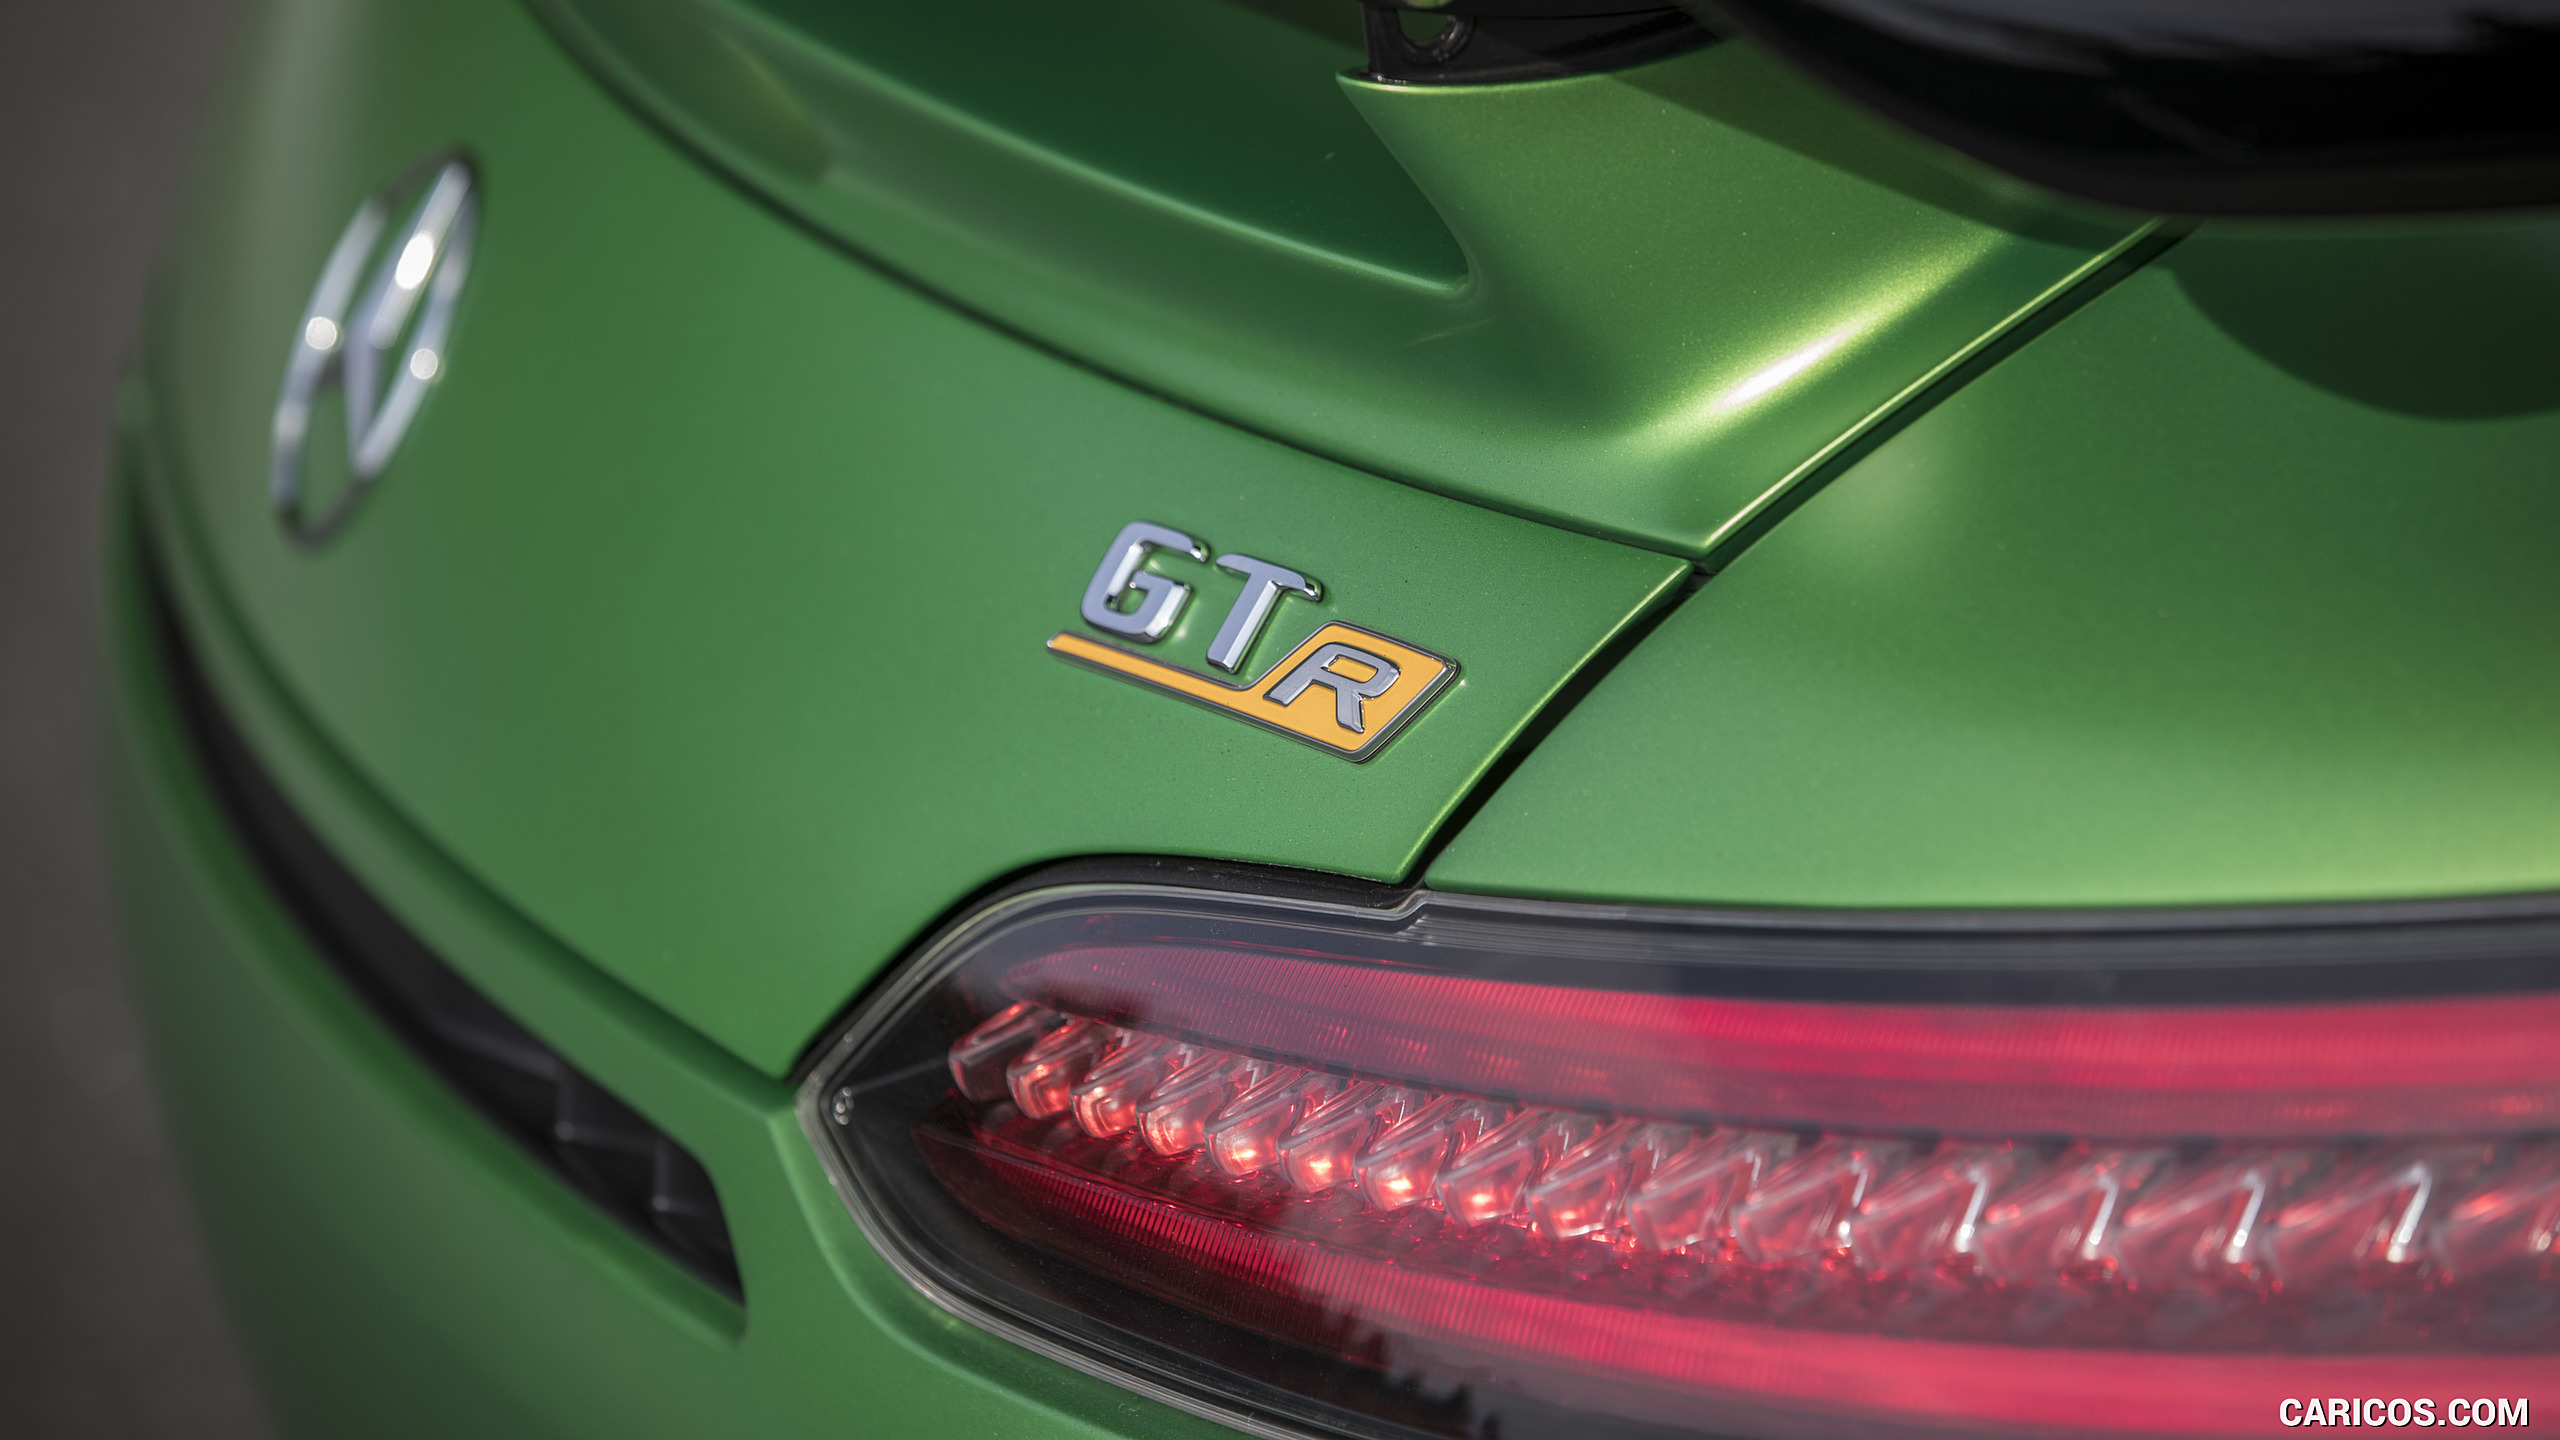 2017 Mercedes-AMG GT R Coupe - Tail Light, #182 of 182